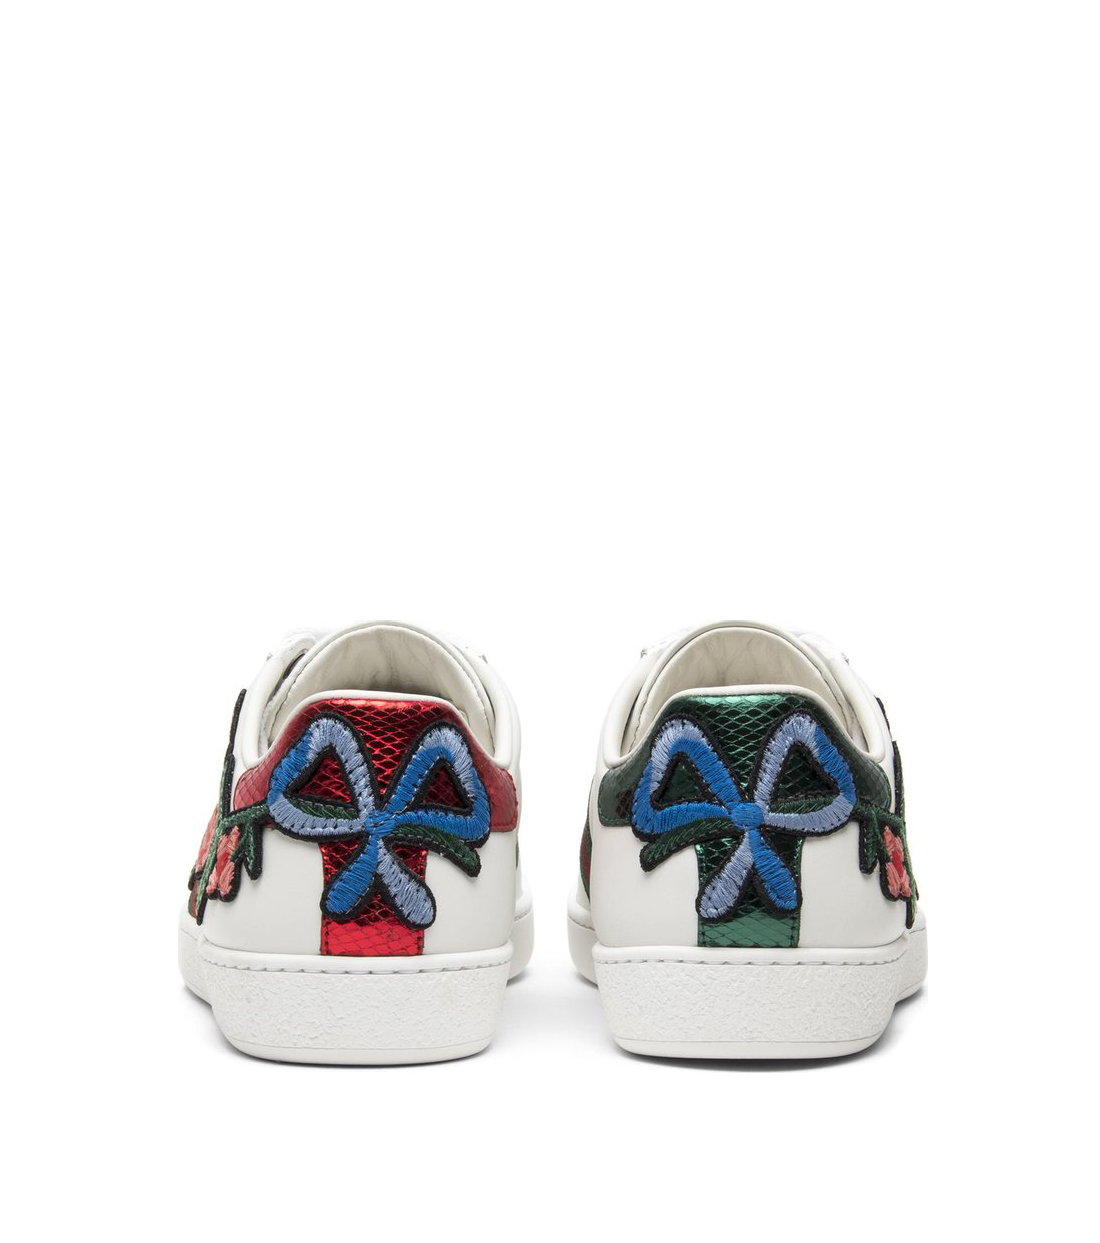 Gucci Ace with Floral Print